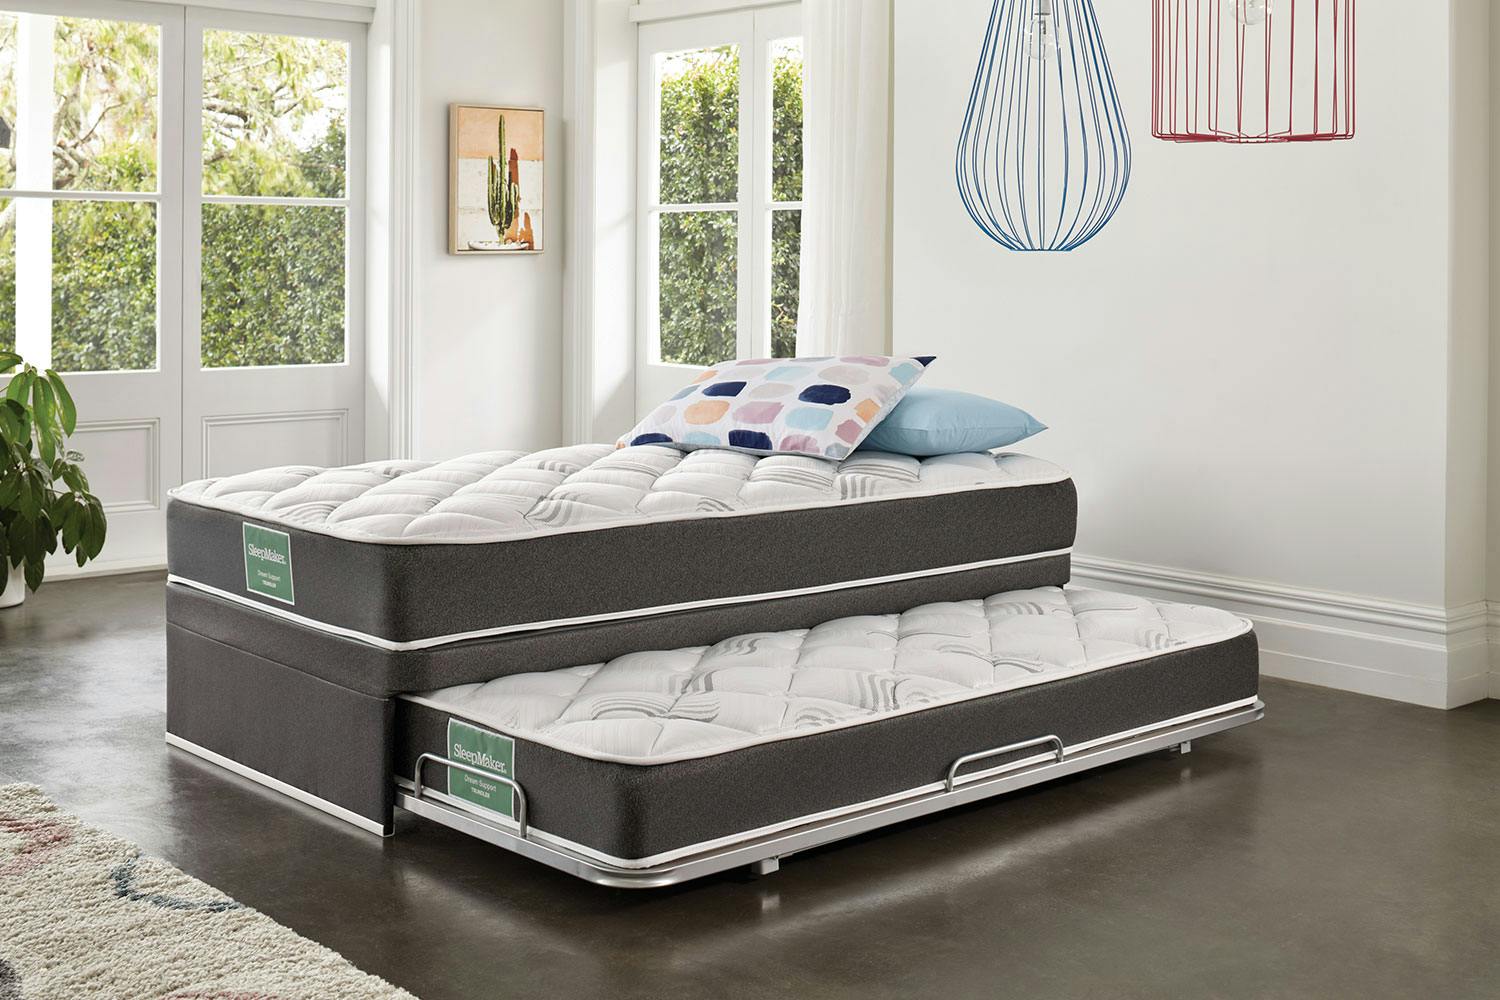 king single beds and mattresses